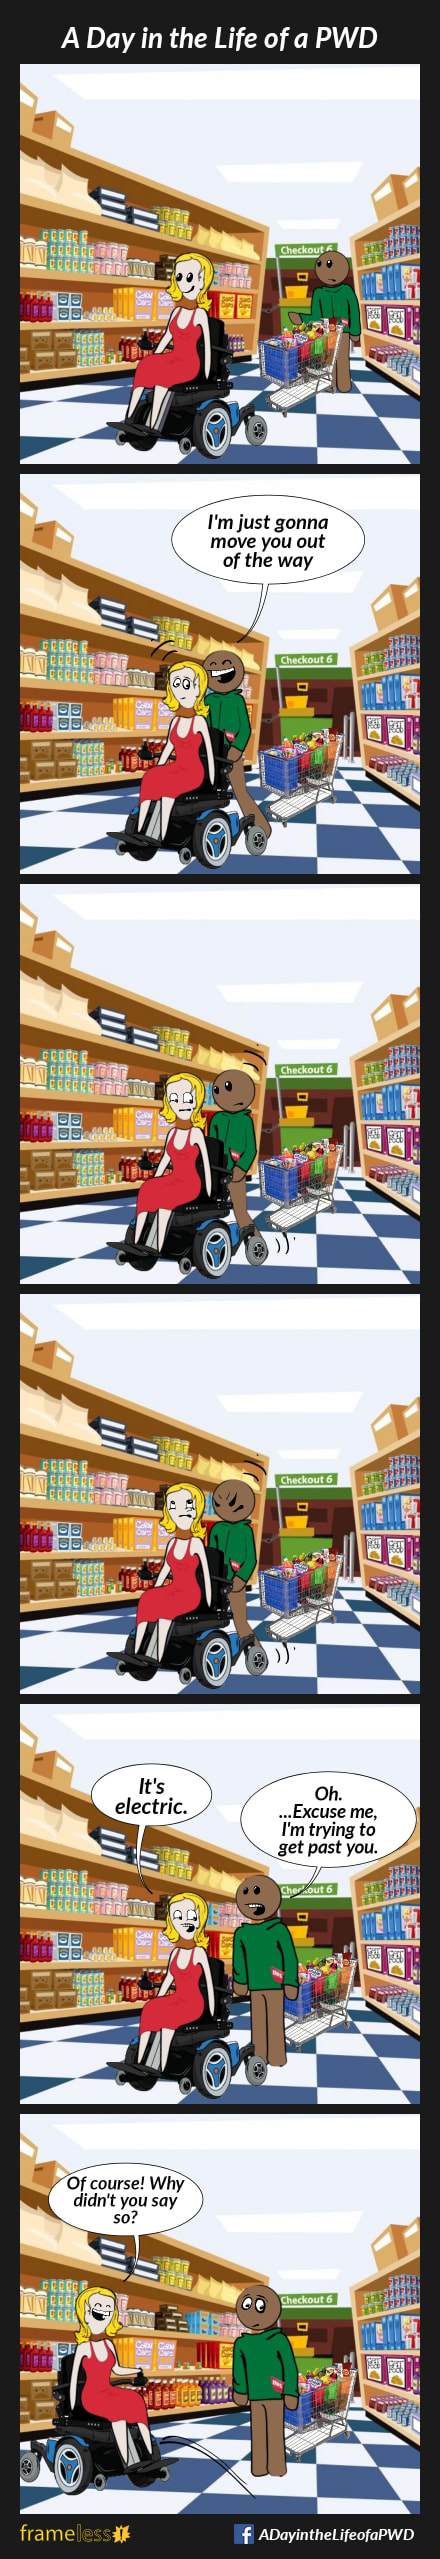 COMIC STRIP 
A Day in the Life of a PWD (Person With a Disability) 

Frame 1:
A woman in a power wheelchair is in a grocery store. A man pushing a cart full of groceries is in the same aisle. The woman is inadvertently blocking his way.

Frame 2:
The man grabs the back of her wheelchair, startling her.
MAN: I'm just going to move you out of the way

Frame 3:
The man pushes, but the chair doesn't move.

Frame 4:
The man pushes harder, but the chair won't budge.
The woman rolls her eyes.

Frame 5:
WOMAN: It's electric.
MAN: Oh....Excuse me, I'm trying to get past you

Frame 6:
The woman moves over.
WOMAN: Of course! Why didn't you say so?
The man is embarrassed. 